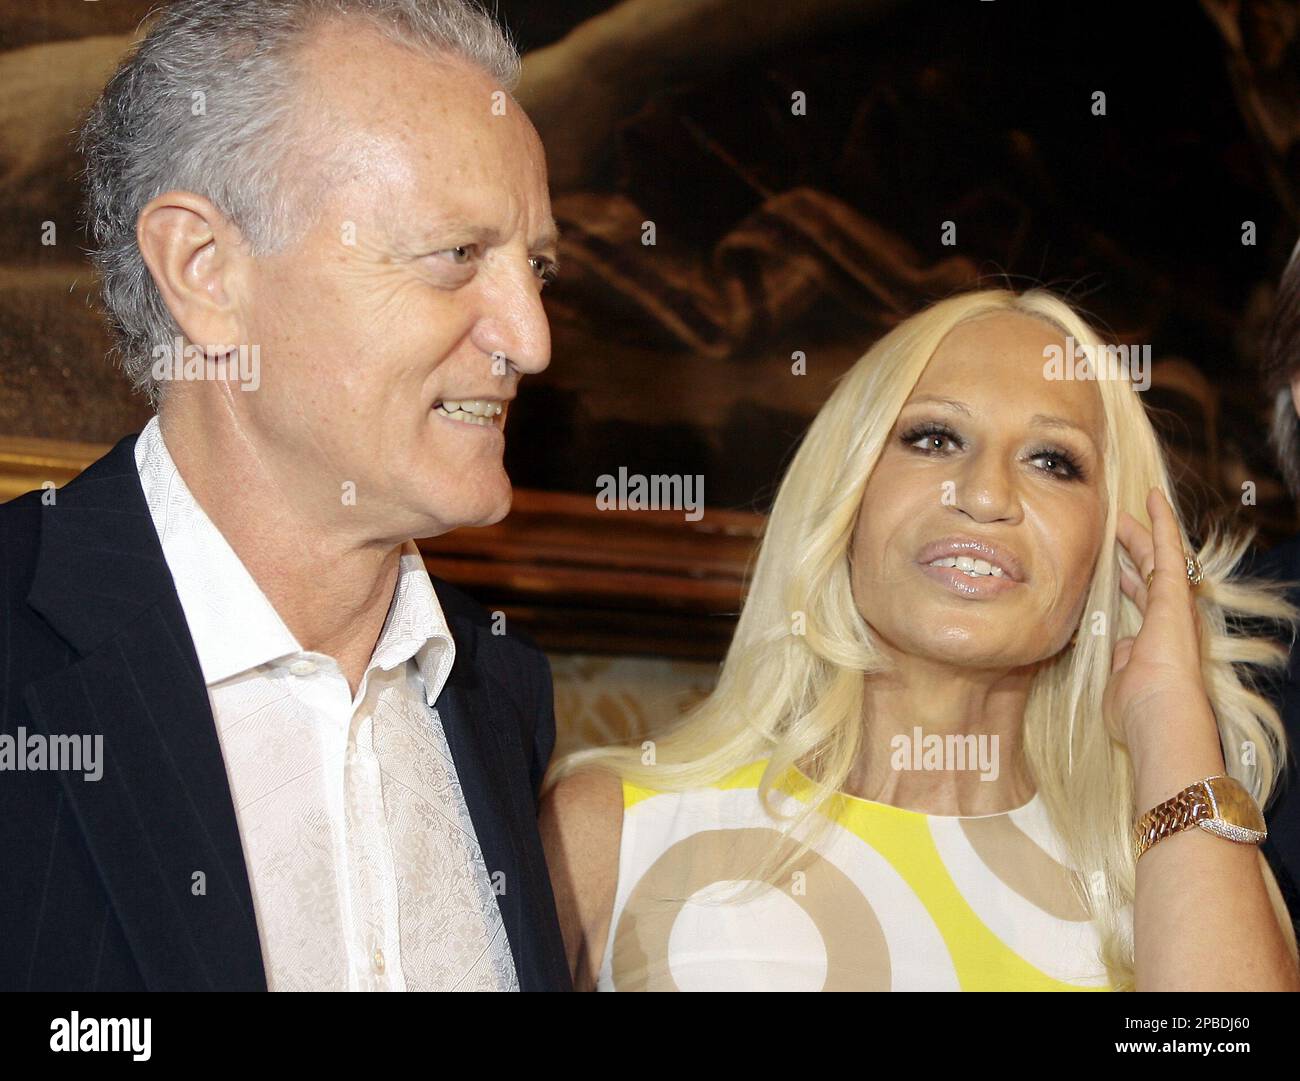 Italian fashion designer Donatella Versace with his brother Santo, left,  attend a press conference in Milan, Italy, Friday, June 15, 2007, to  present a series of initiatives on occasion of the tenth